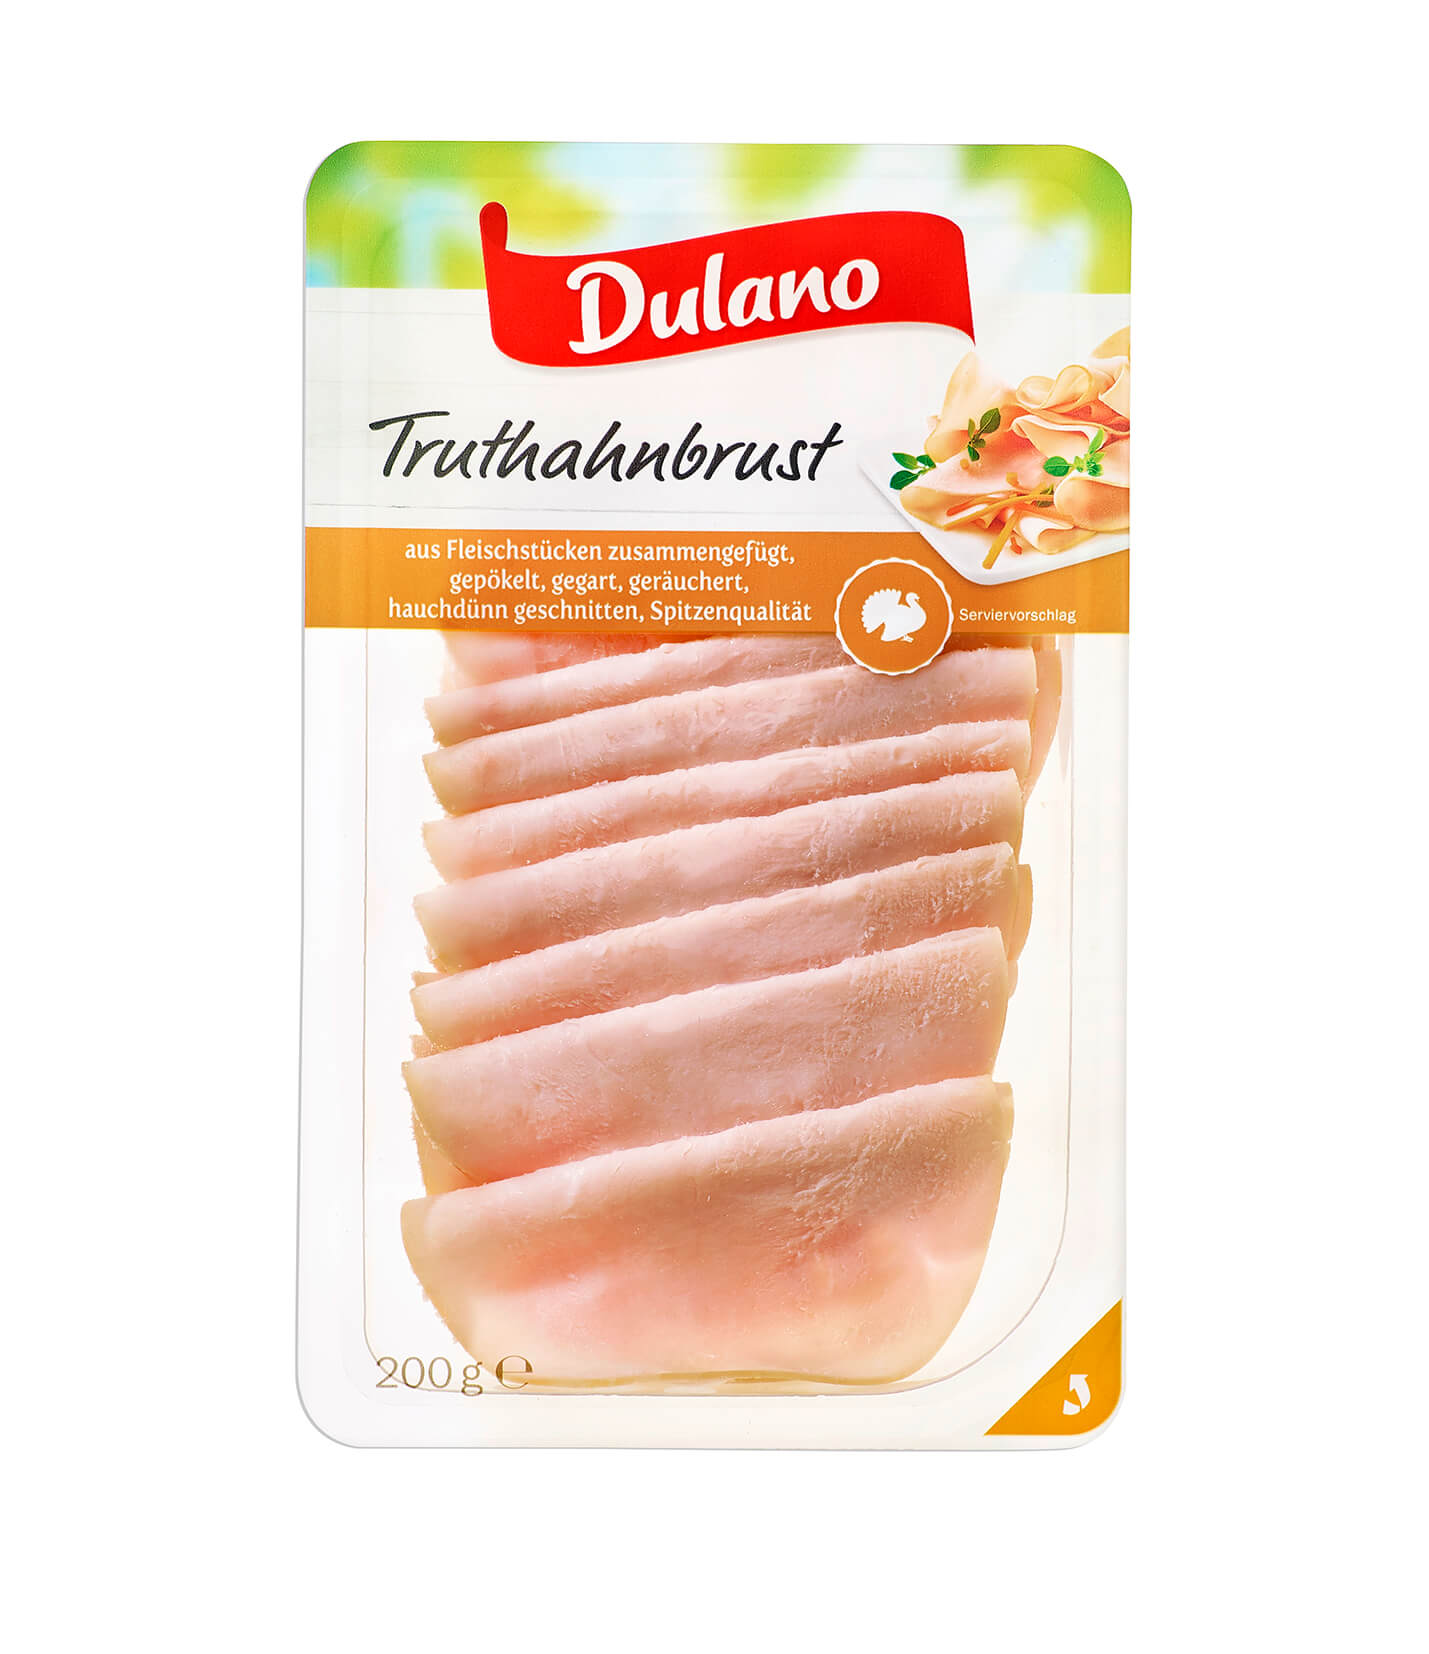 Dulano Mixed (200 Sausages mynetfair · - Beverage Prepared/Processed · Meat/Poultry/Sausages (Lidl) / Tobacco Species Butchers Truthahnbrust GmbH / grams) Meat/Poultry Family Hauchdünnschnitt - The Prepared/Processed Food Germany Sausages